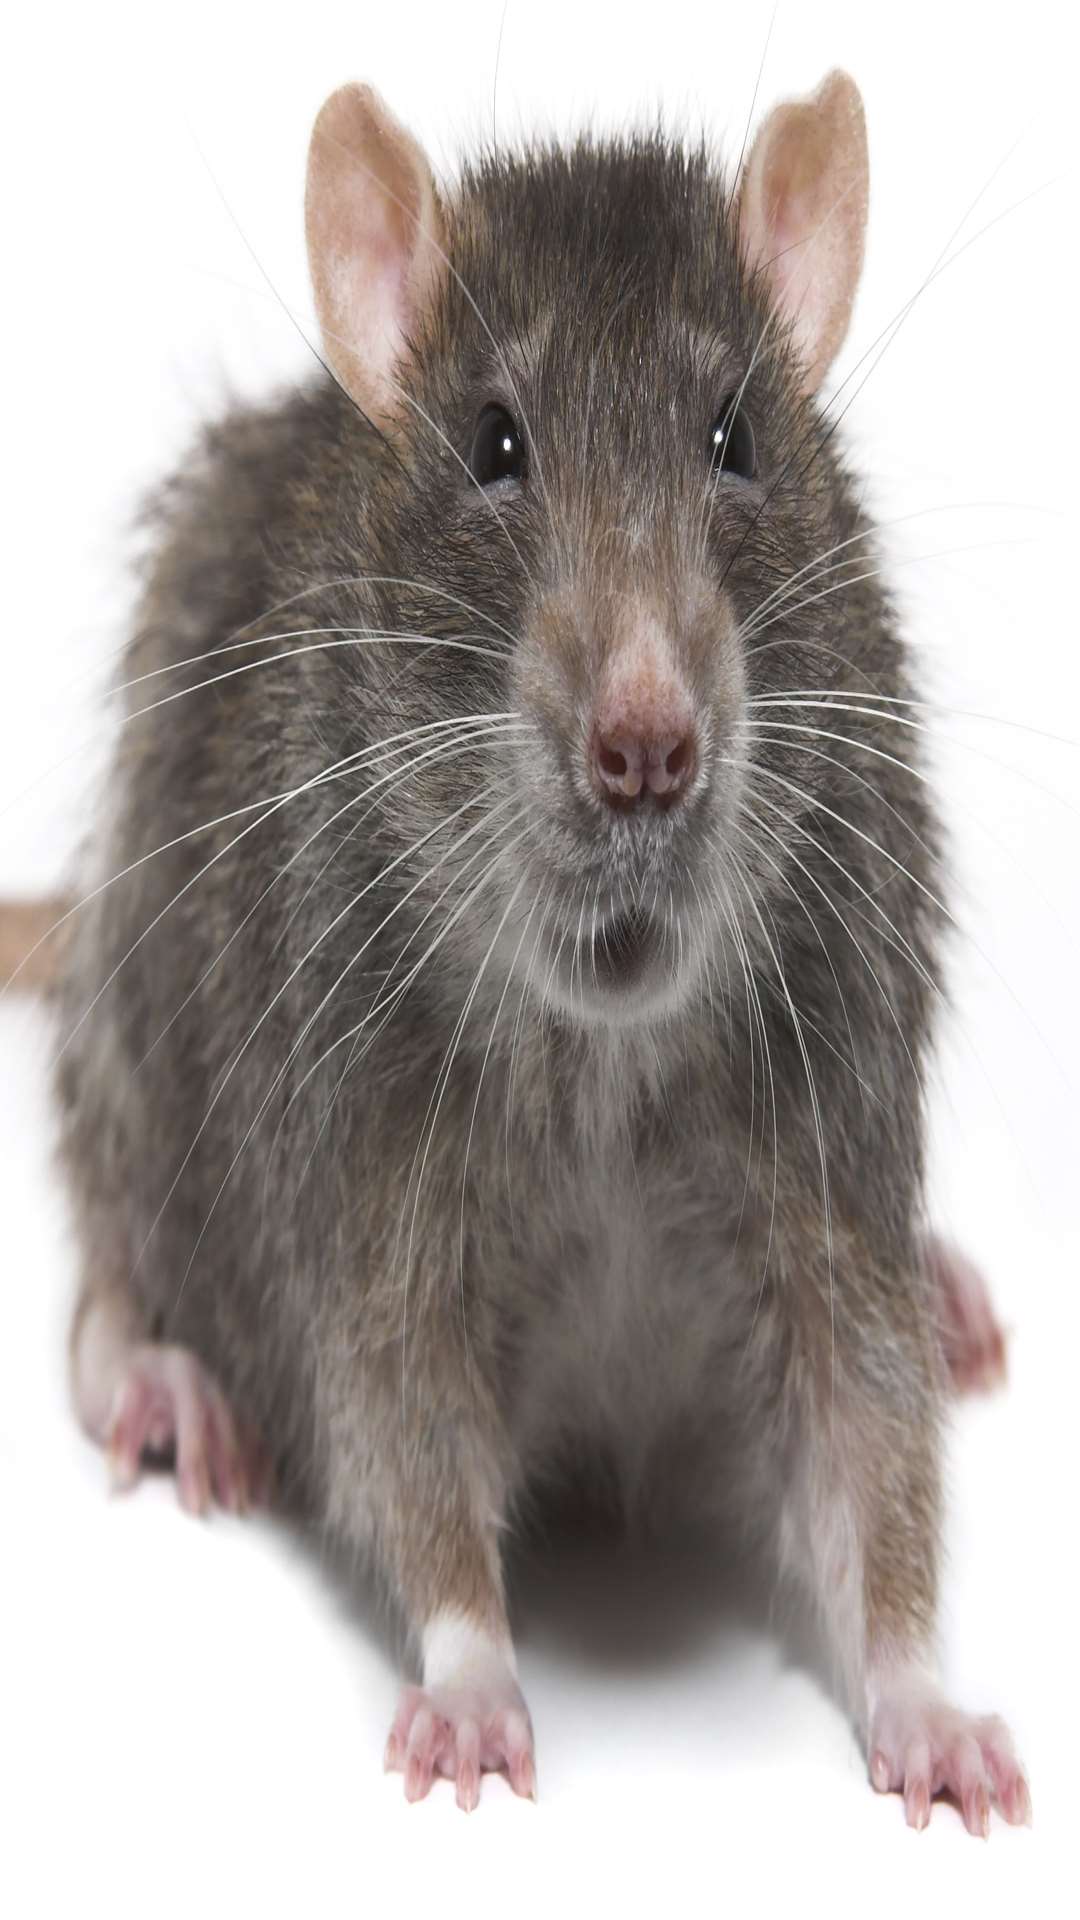 A rat was spotted in the cafe. Picture: Thinkstock